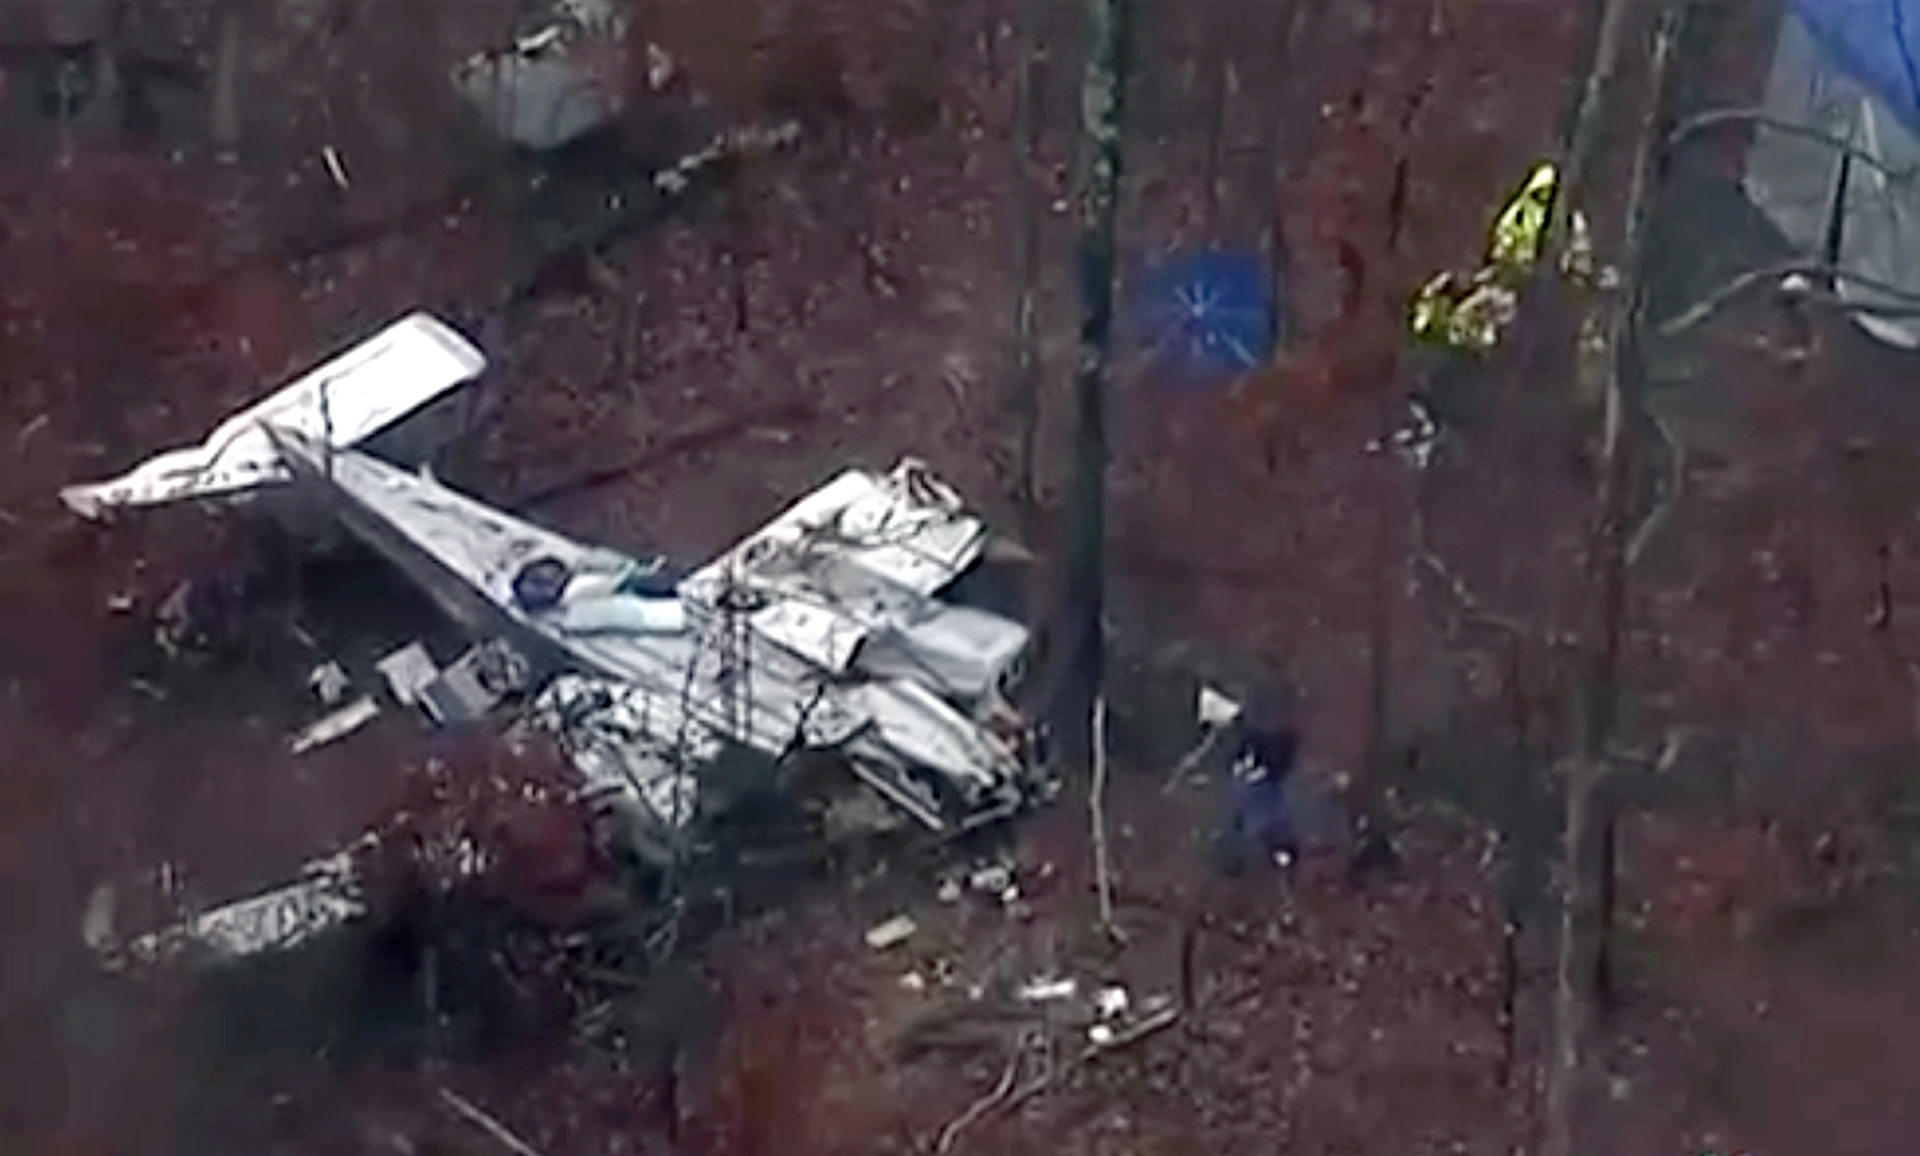 The plane crashed in woods in Kuttawa, Kentucky. Photo: SCMP